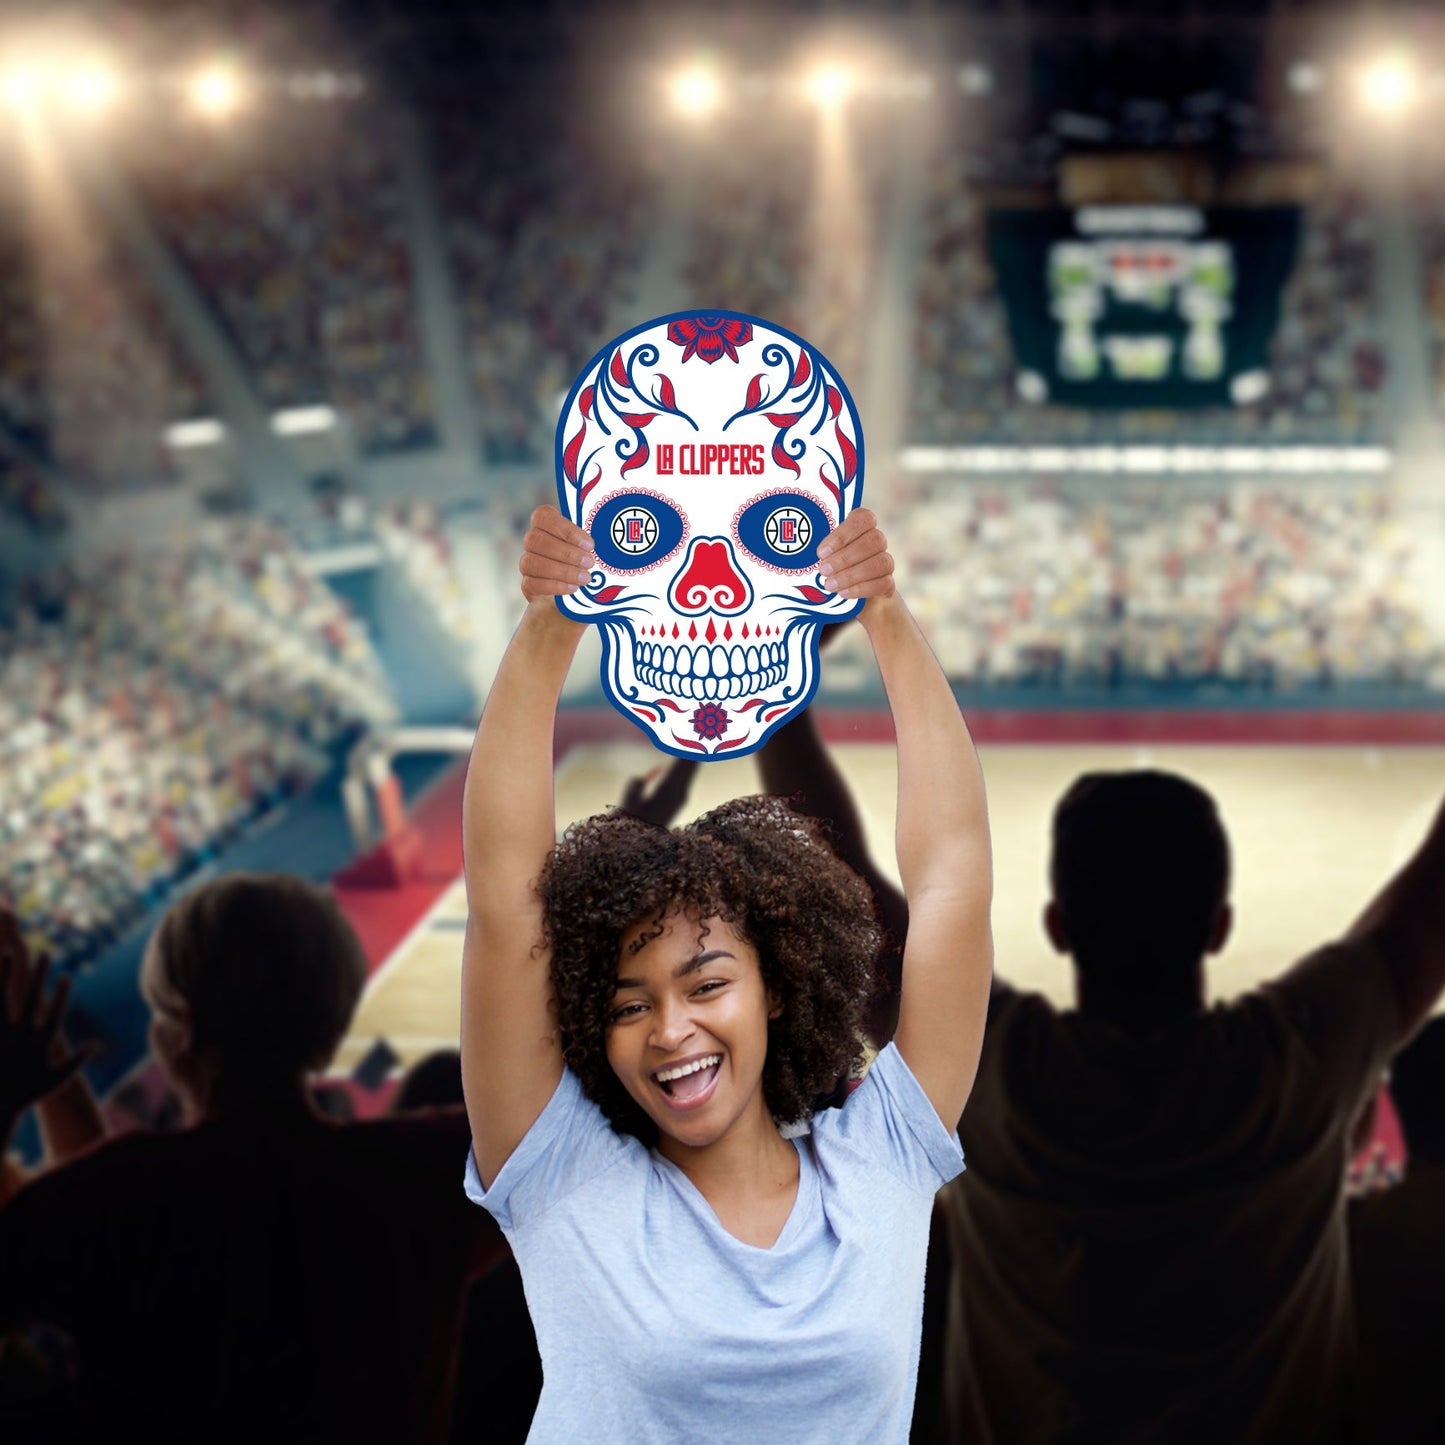 Los Angeles Clippers: Skull Foam Core Cutout - Officially Licensed NBA Big Head